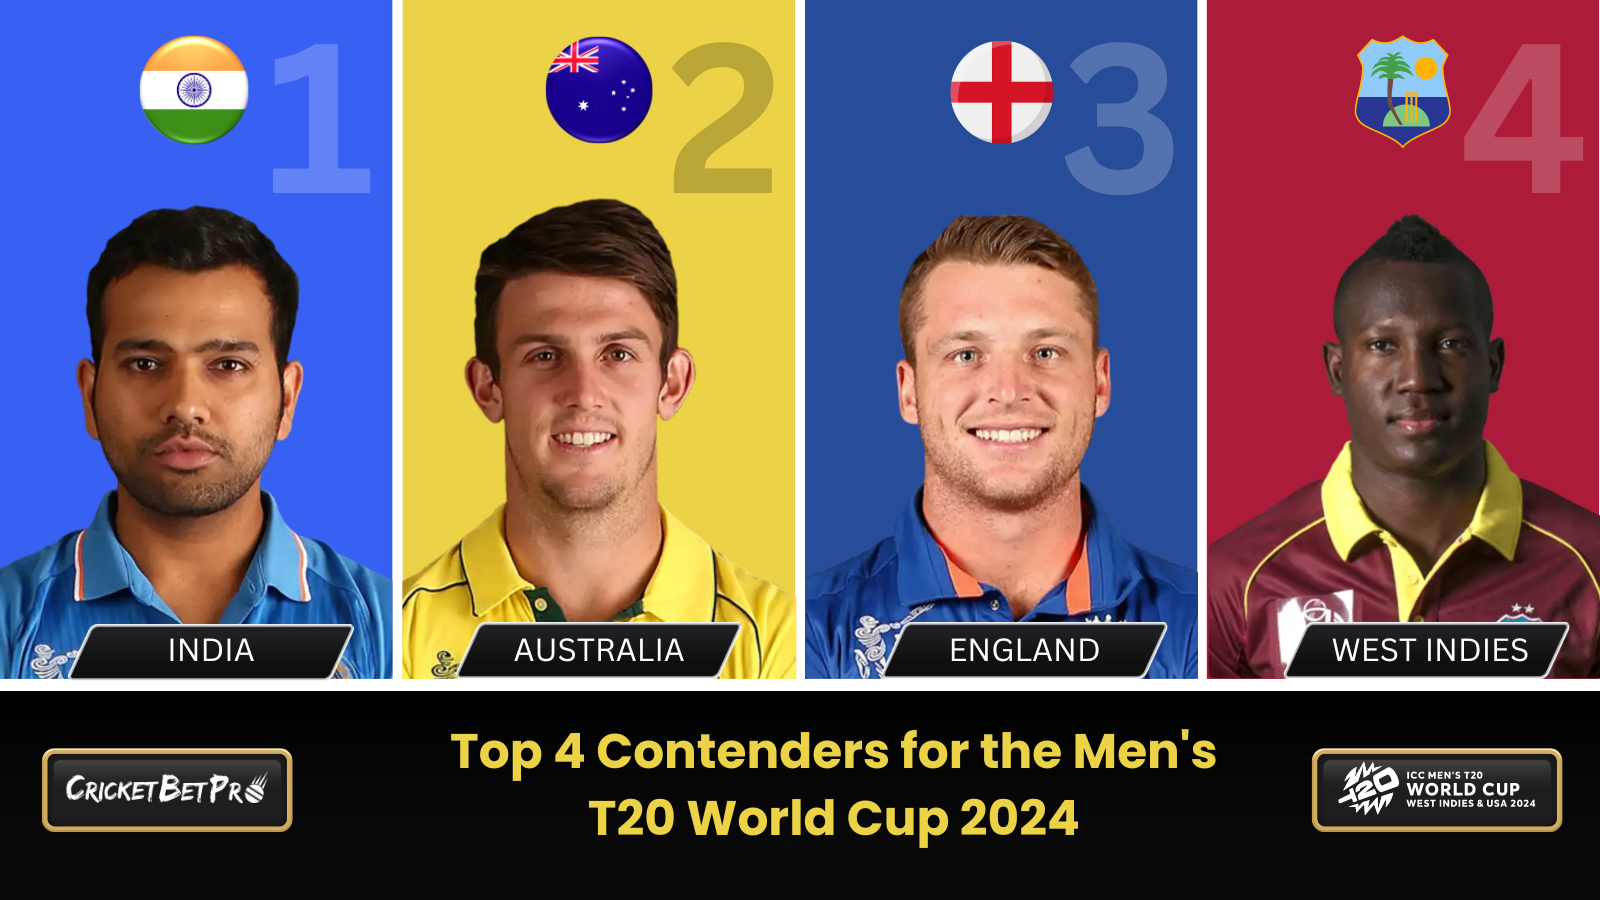 Top 4 Contenders for the Men's T20 World Cup 2024